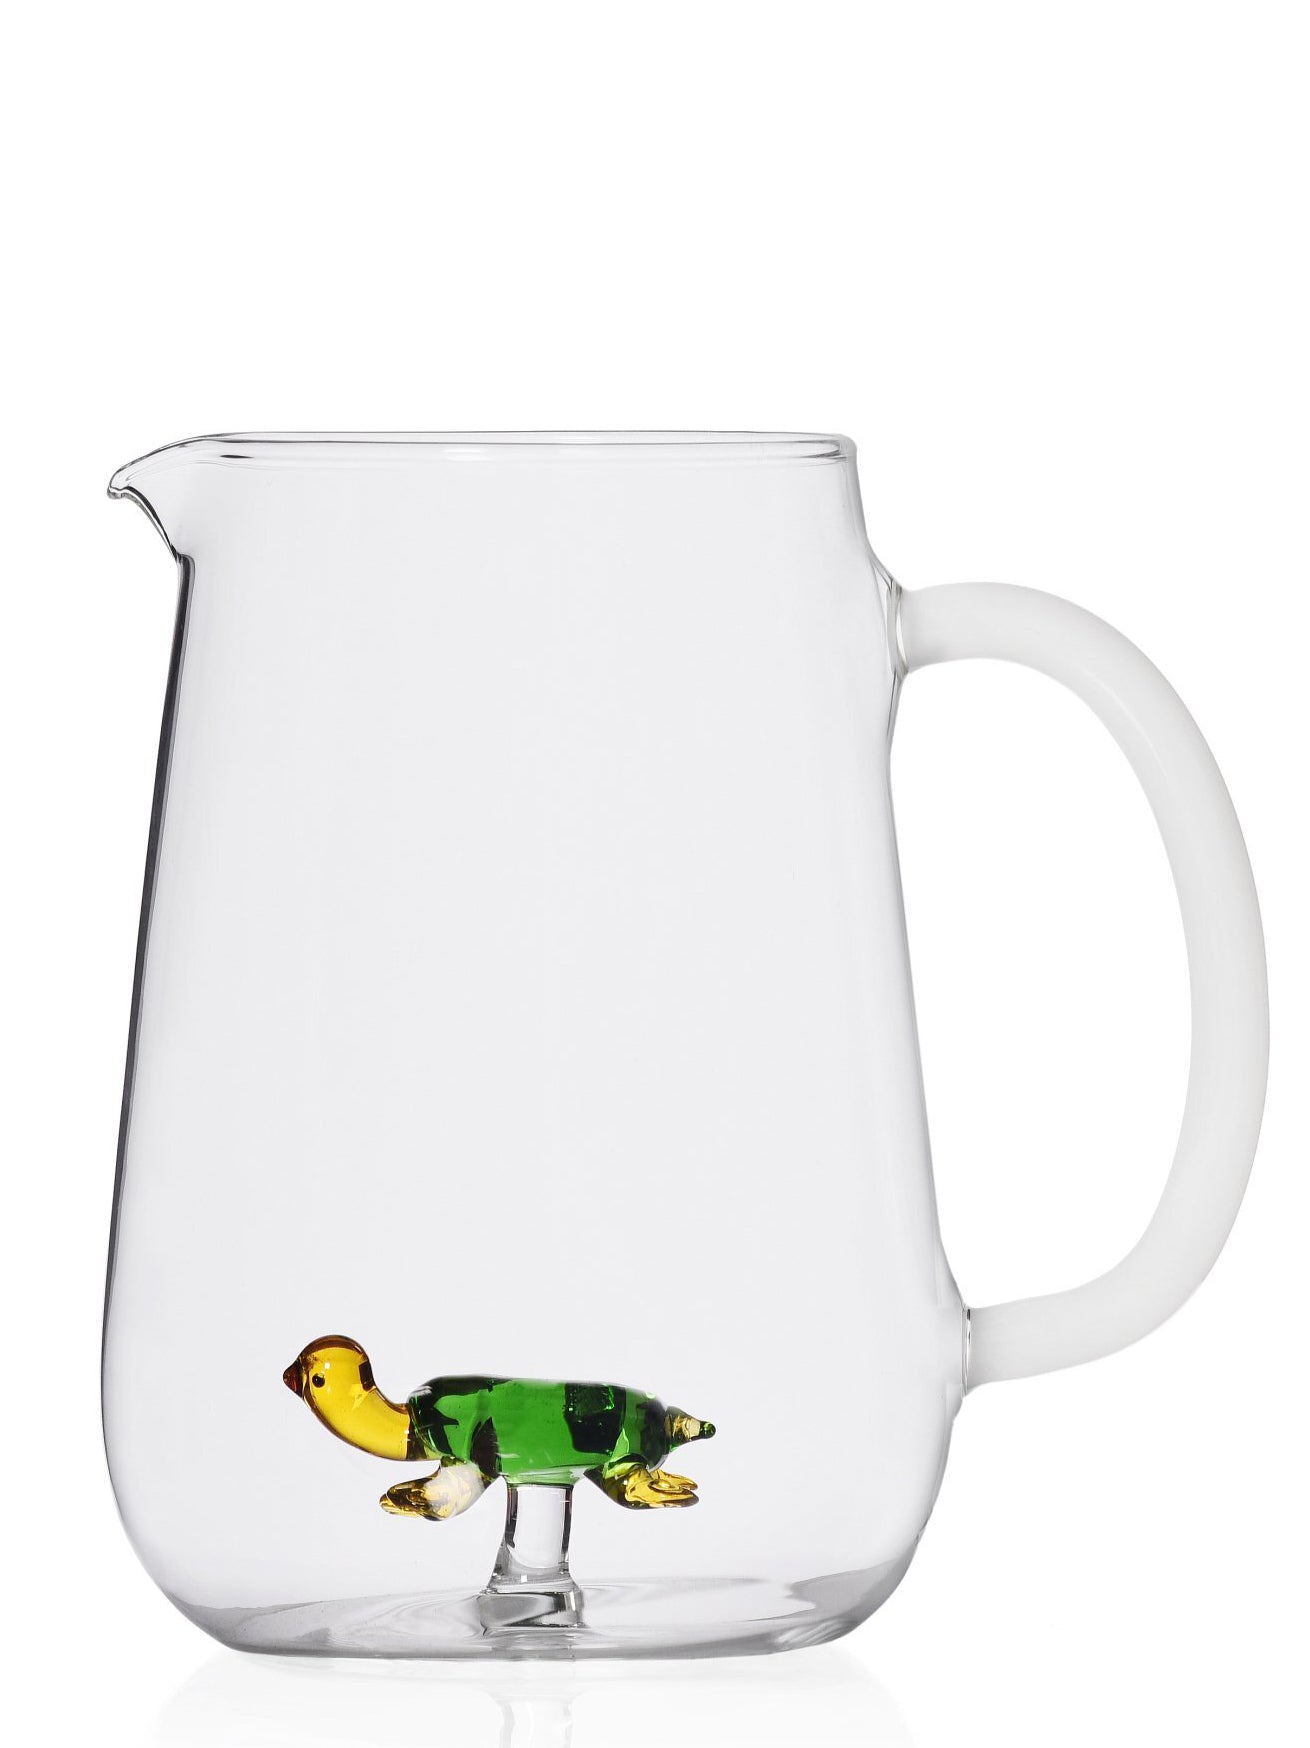 Green Turtle Pitcher, Animal Farm Collection